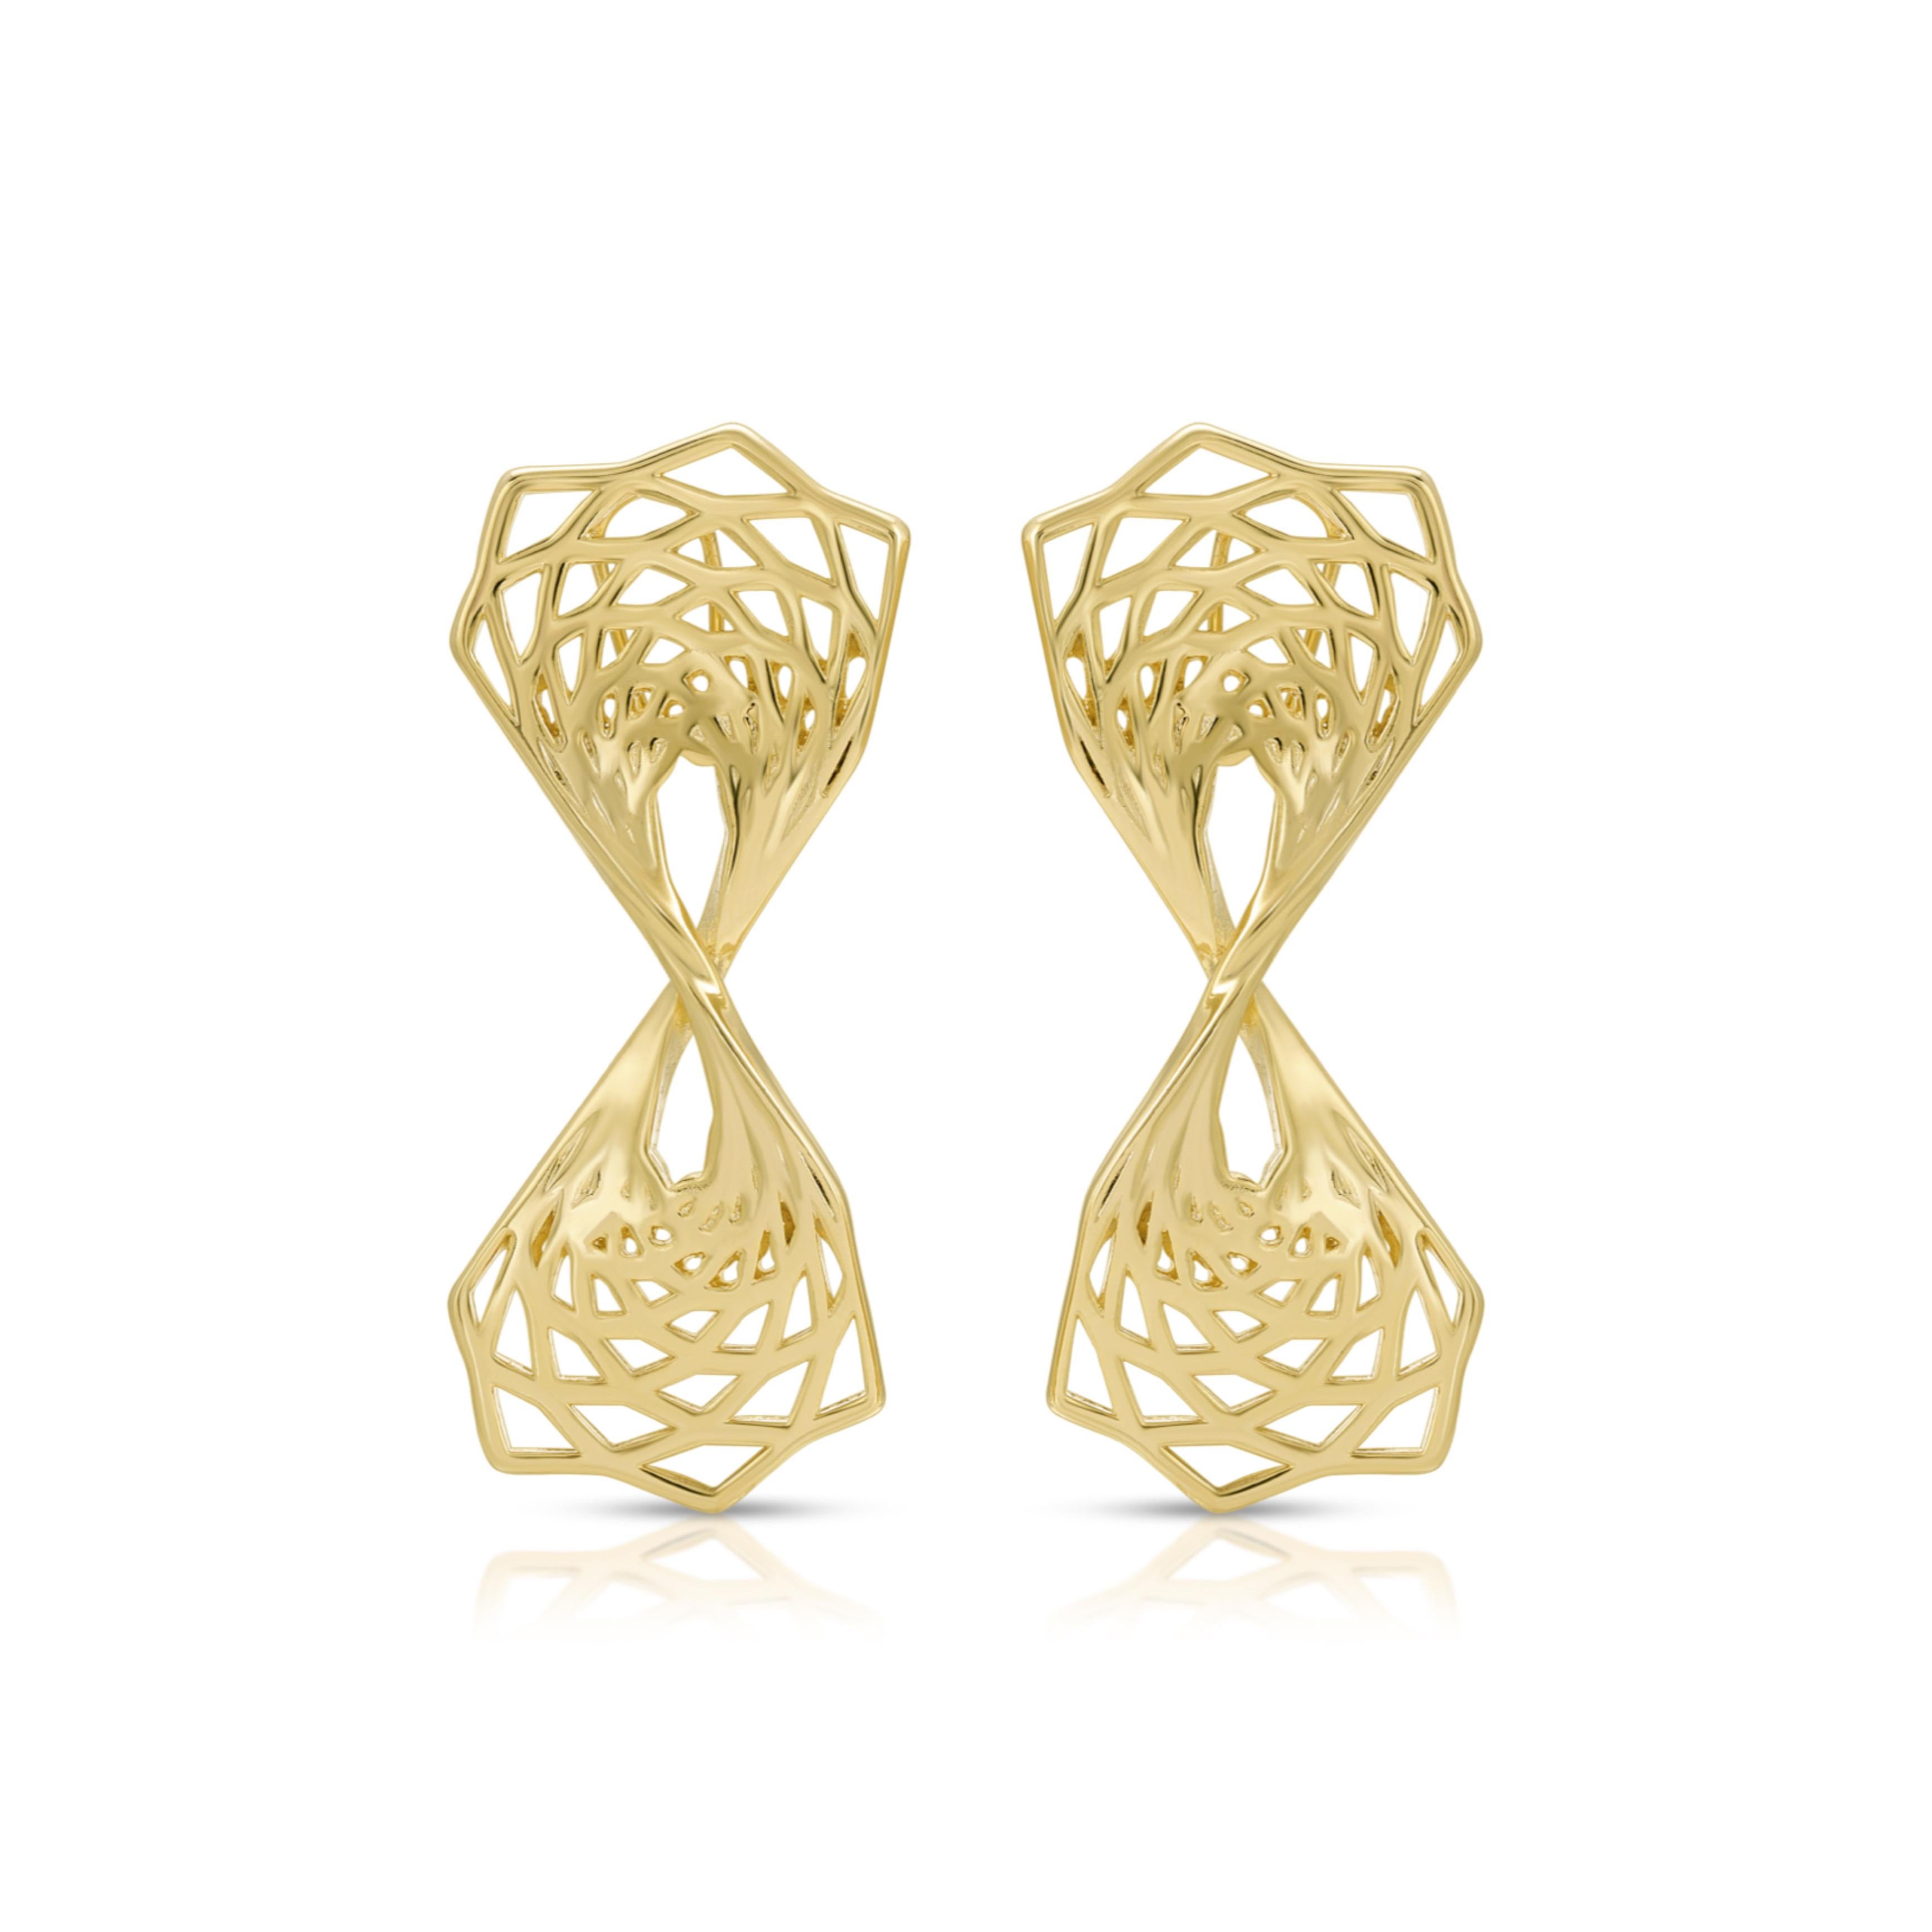 Who says geometry has to be perfect? The Asa Twisted Earrings are proof that breaking the rules can be fun - and stylish! These earrings feature a geometric pattern that's been perfectly drawn, but then twisted or folded to create a whole new form.